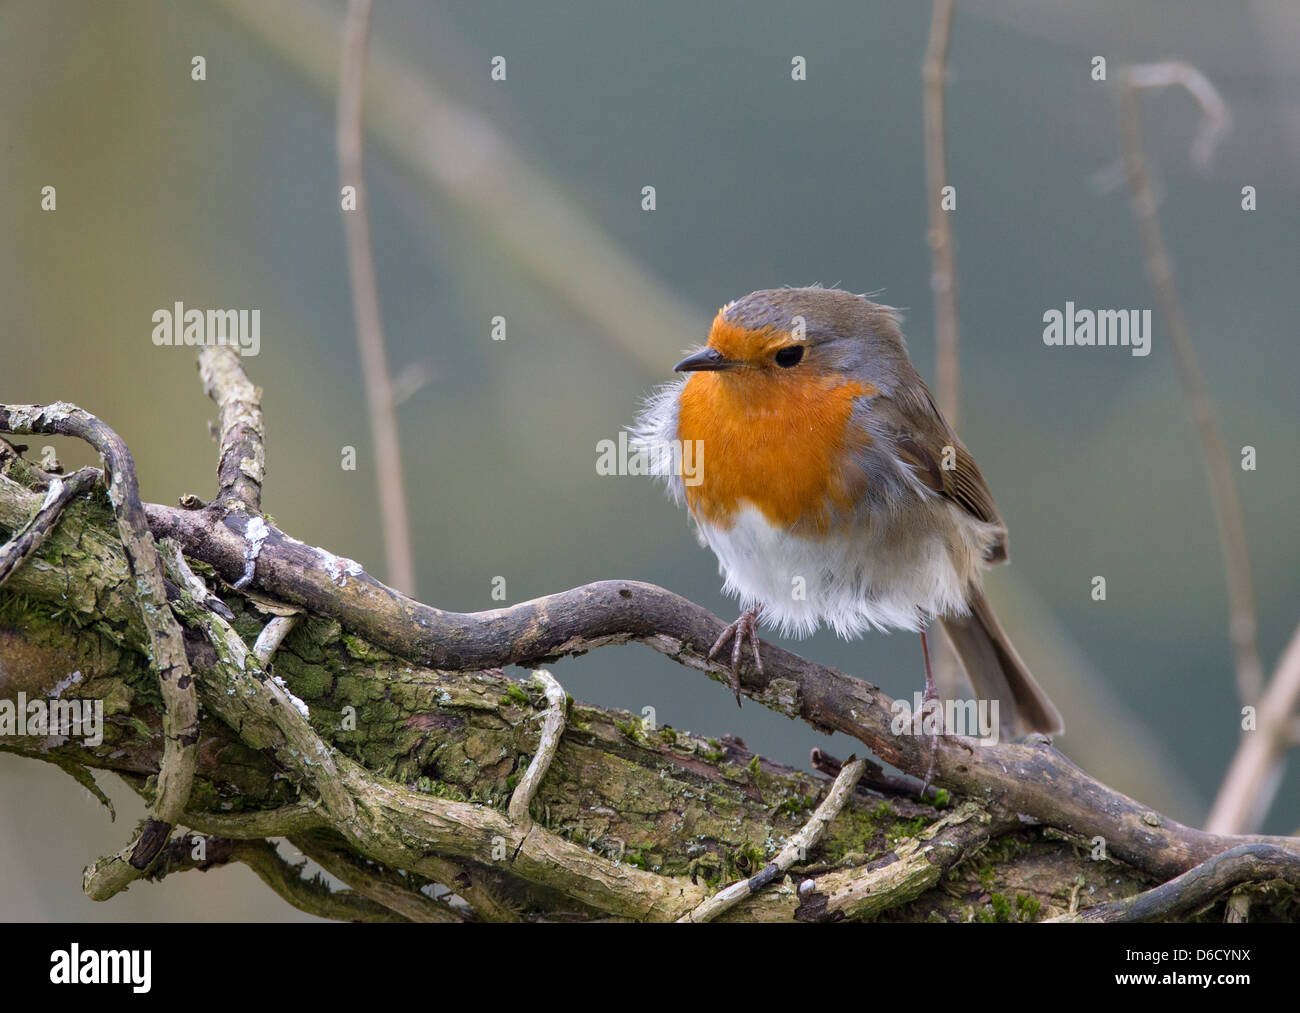 European robin (Erythacus rubecula) sitting on a branch on a cold windy day with its feathers puffed up against the weather Stock Photo